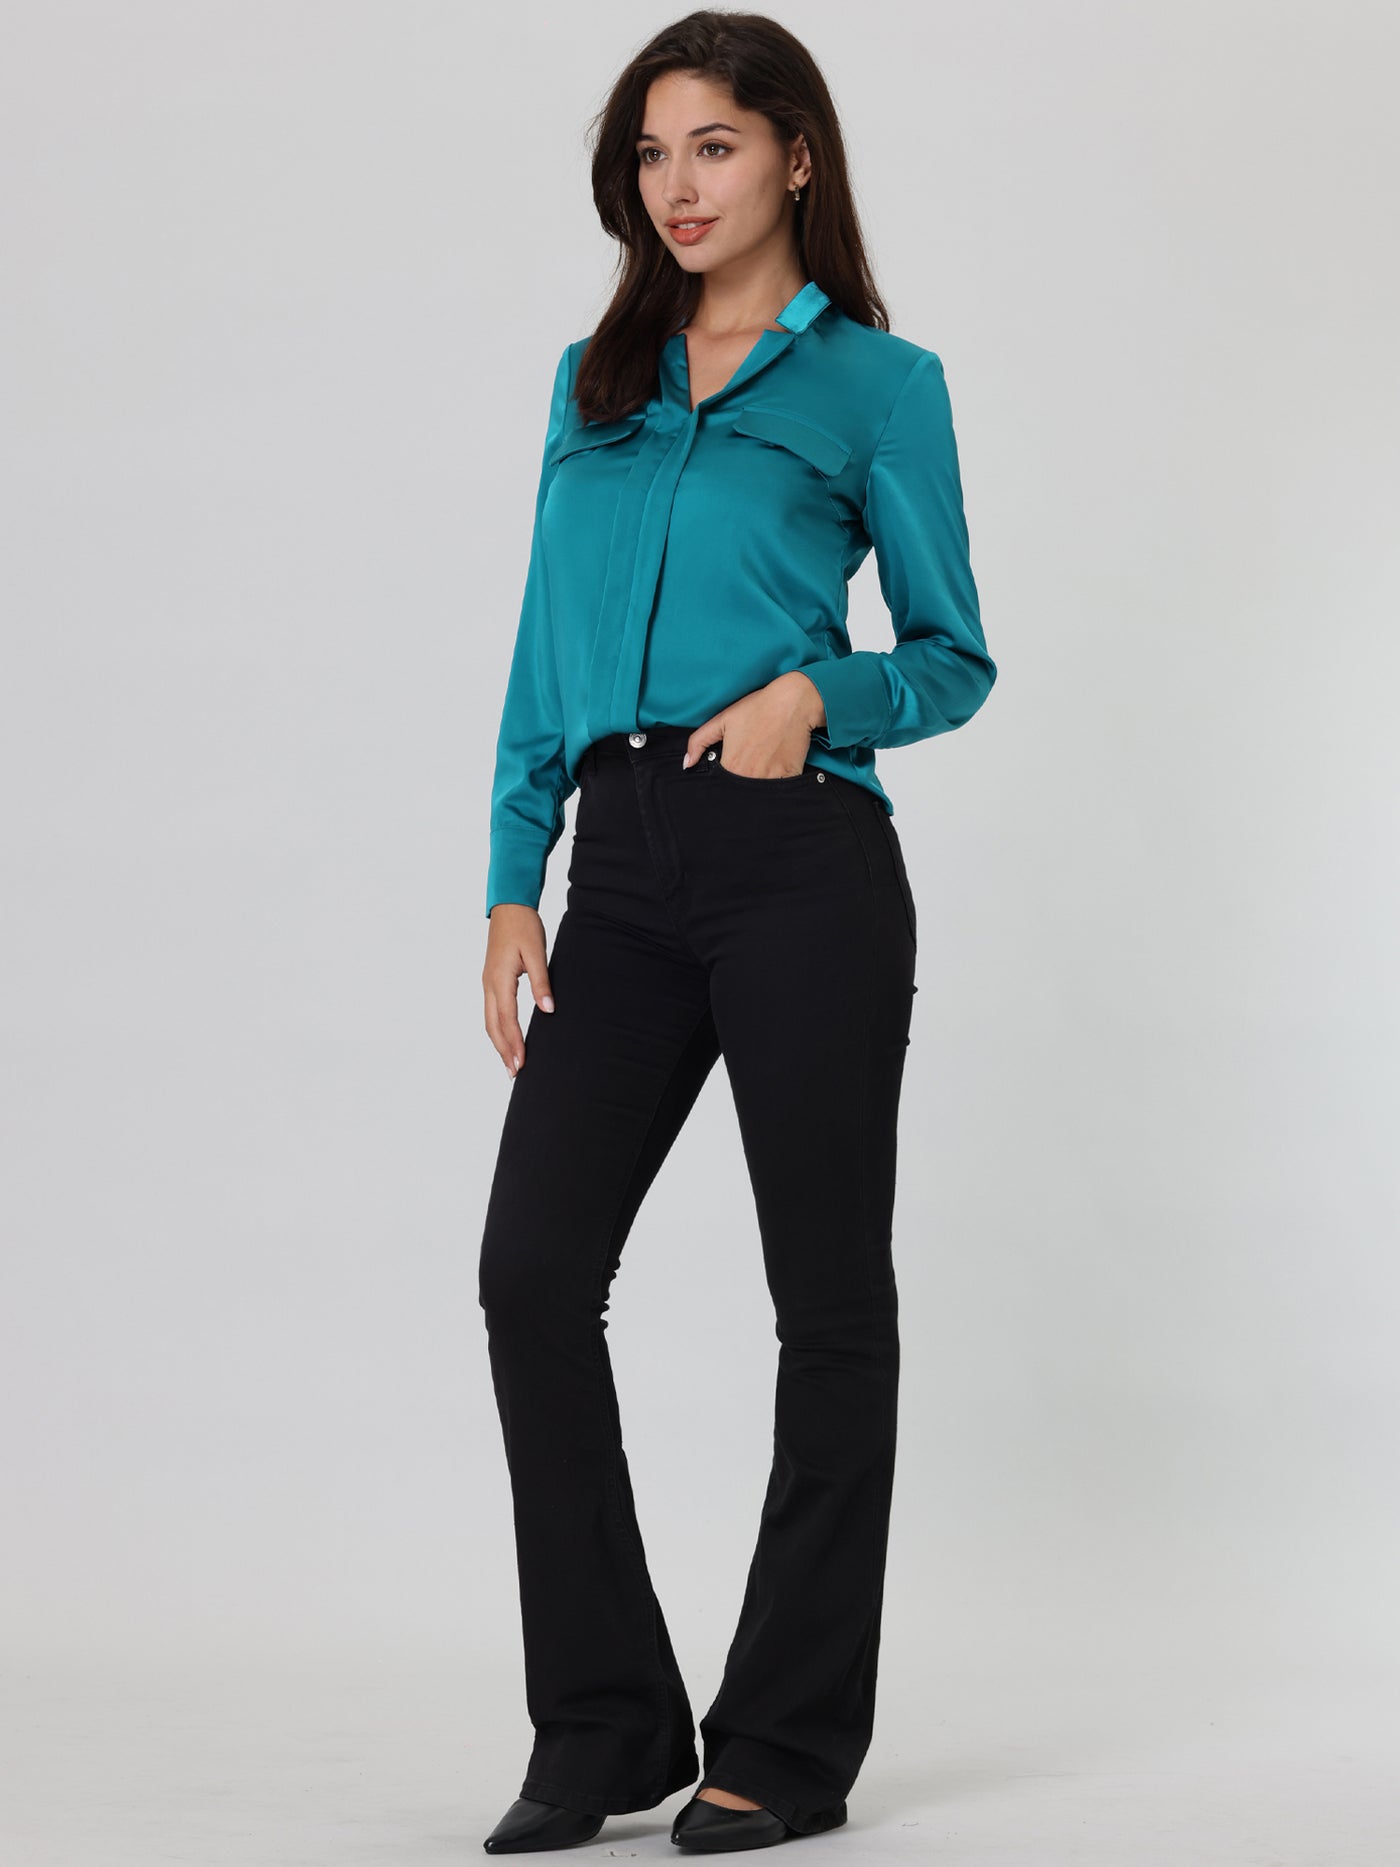 Bublédon Women's V Neck Top Long Sleeve Pleated Front Work Office Blouse